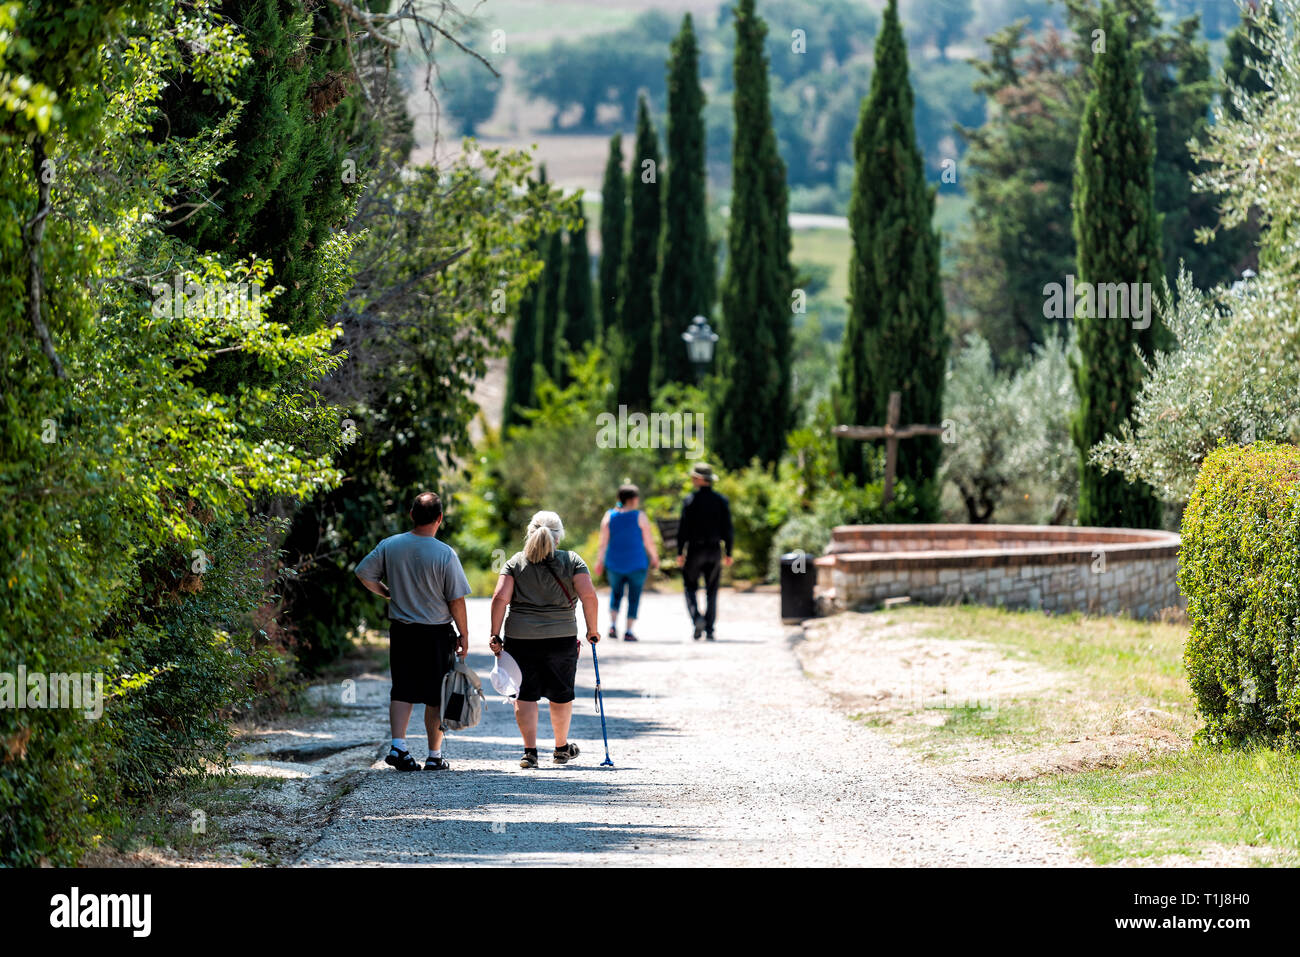 Assisi, Italy - August 29, 2018: Village city in Umbria with road path near San Damiano church during sunny summer day and people walking Stock Photo